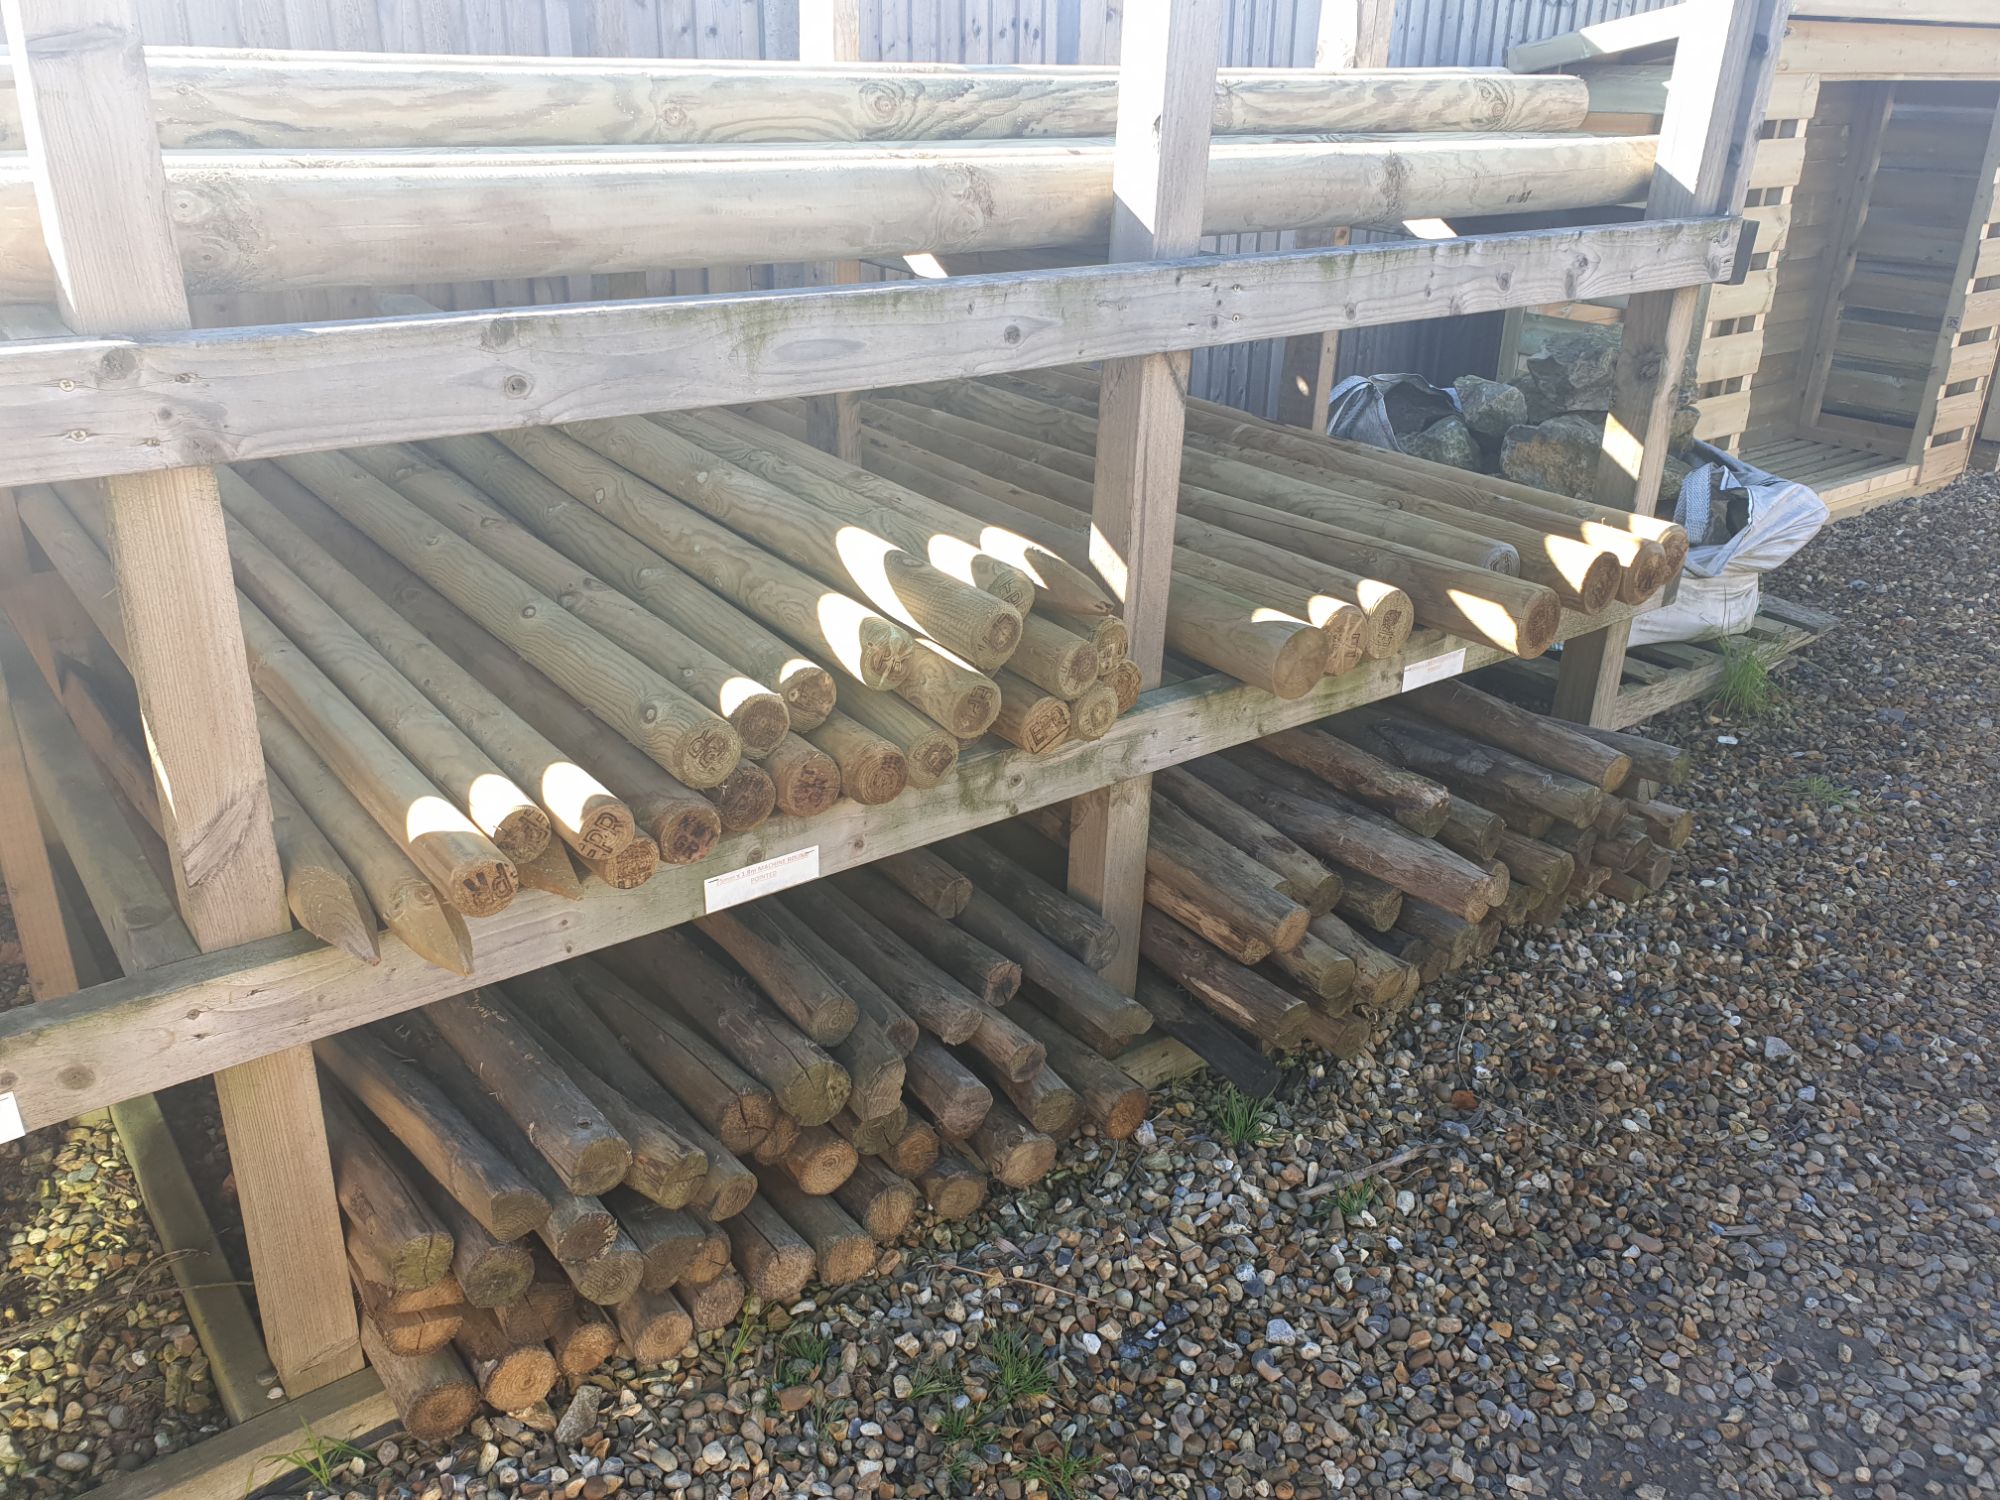 Timber fence posts